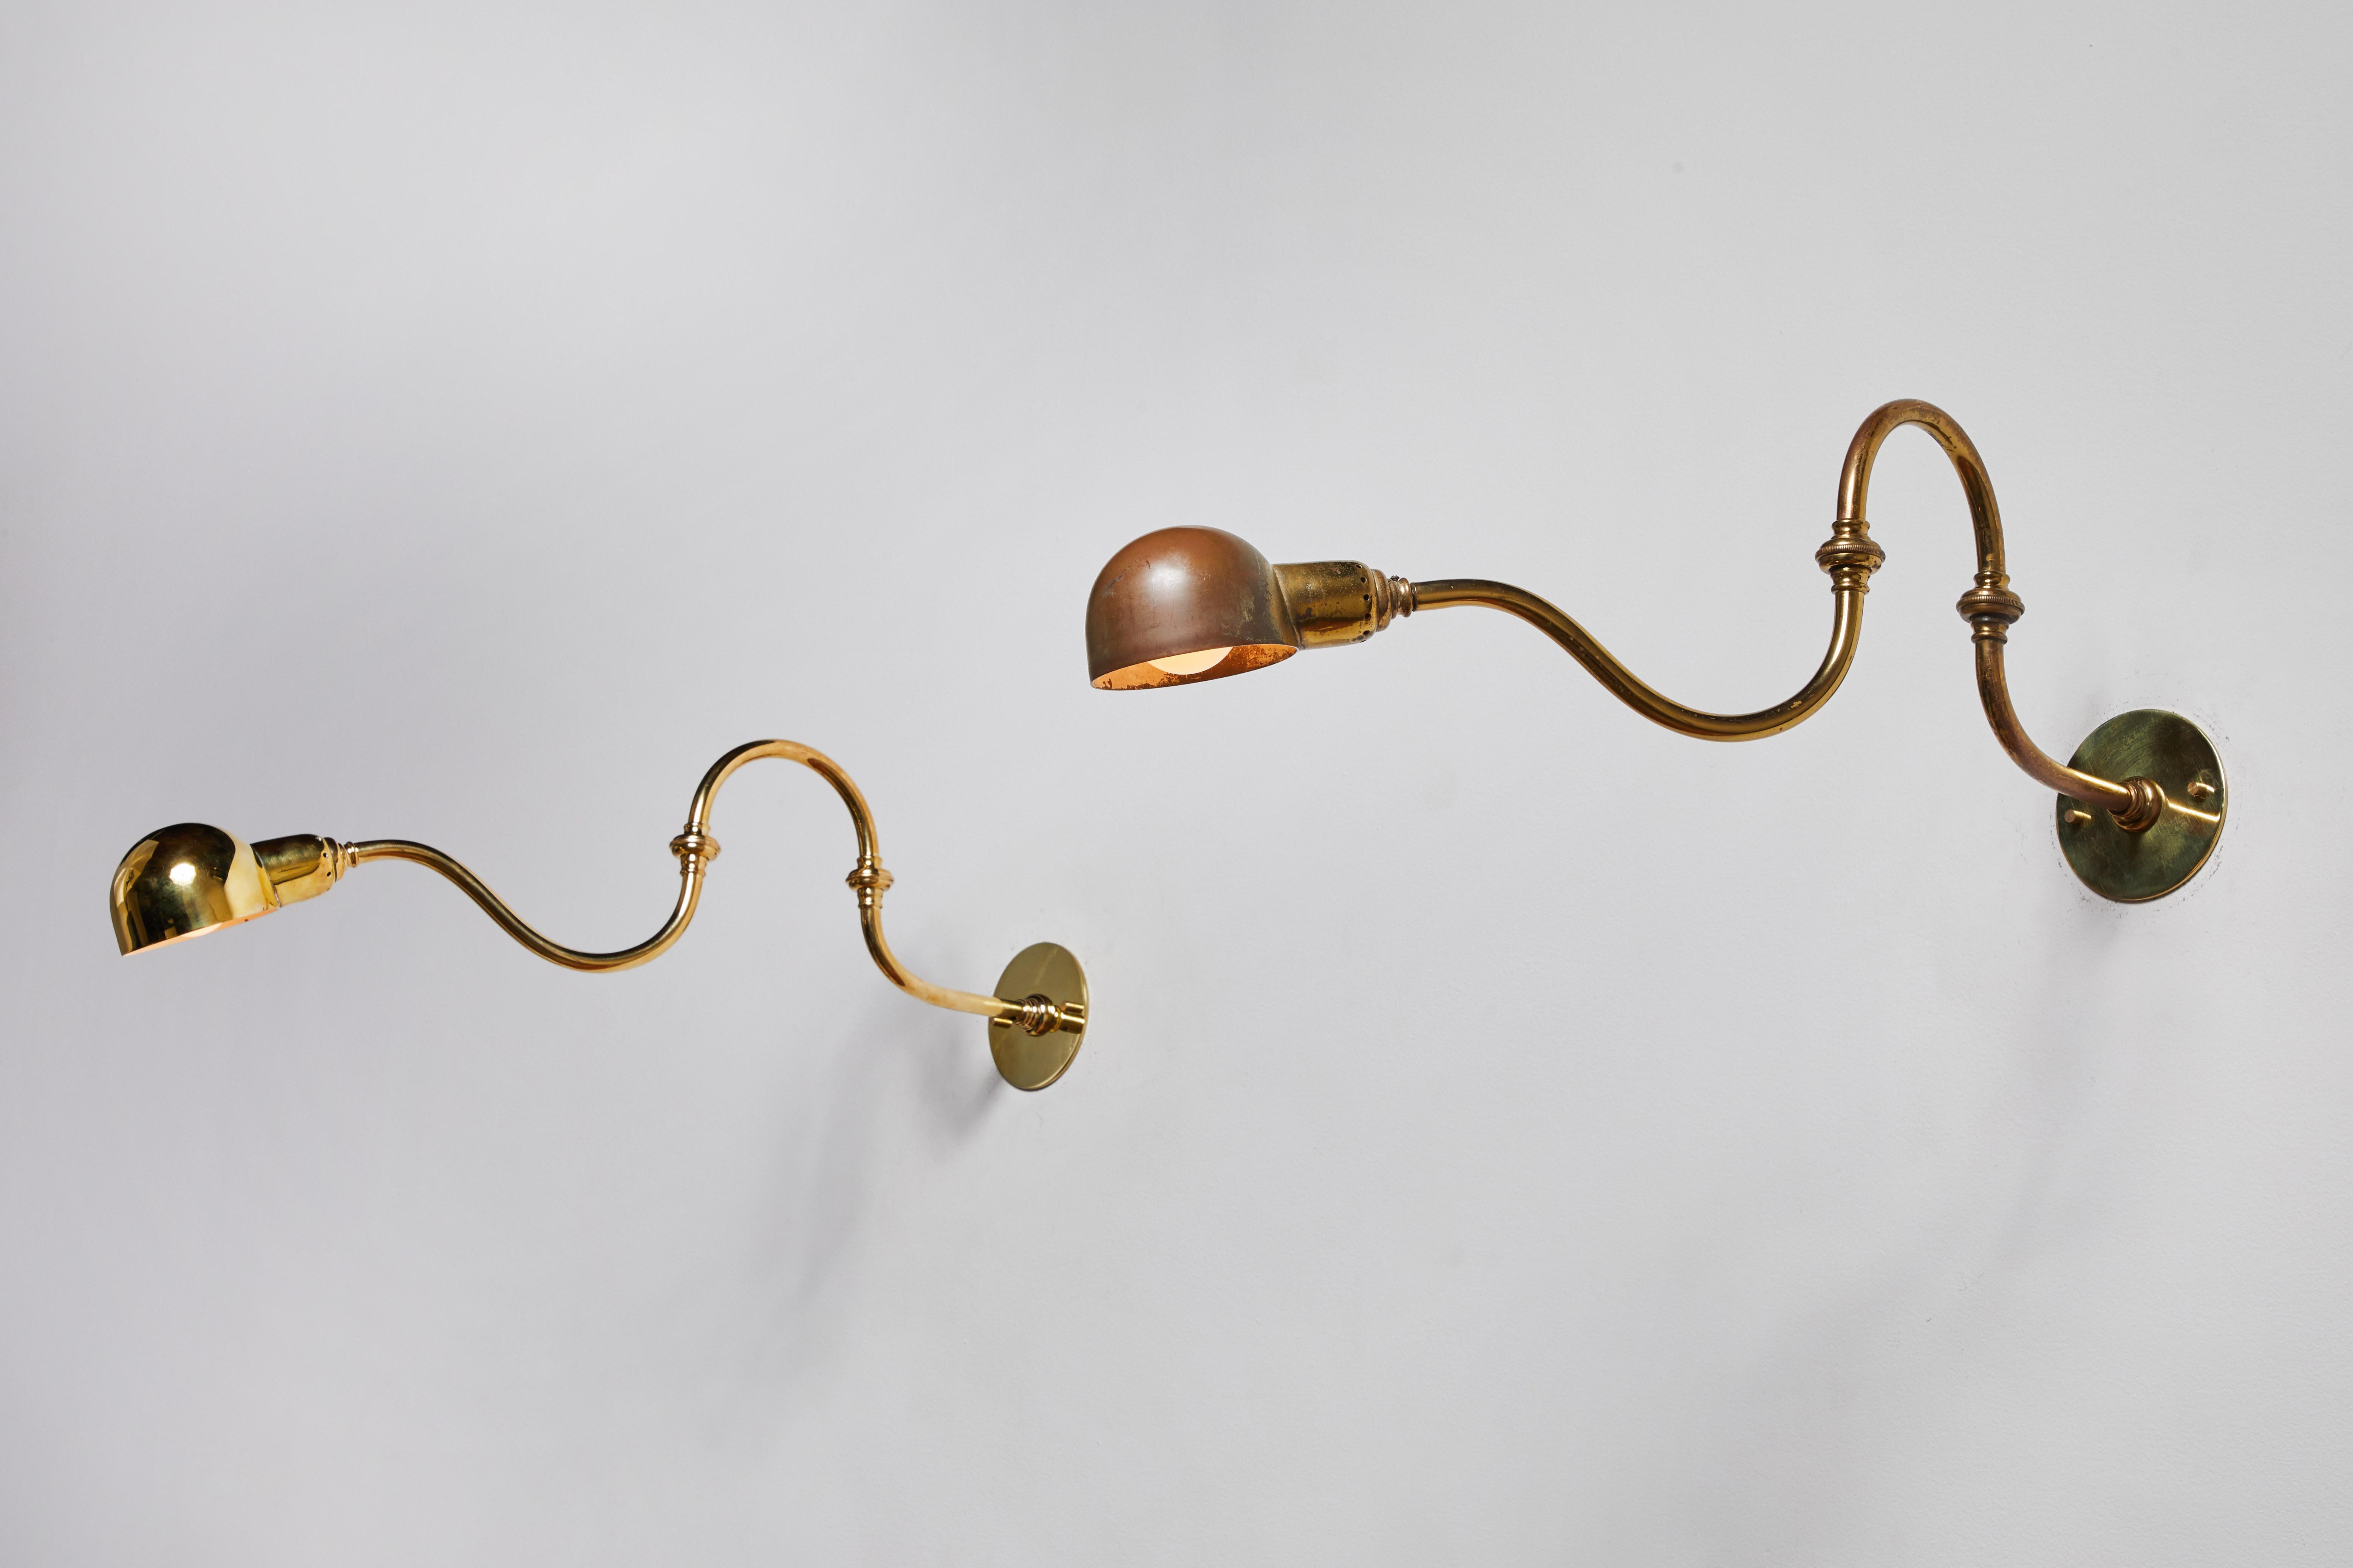 Three LP15 Tromba sconces by Luigi Caccia Dominioni for Azucena. Designed and manufactured in Italy, 1964. Brass, custom brass backplate. Rewired for U.S. junction box. Arms and shades adjust to various positions. Each light takes one E27 75W